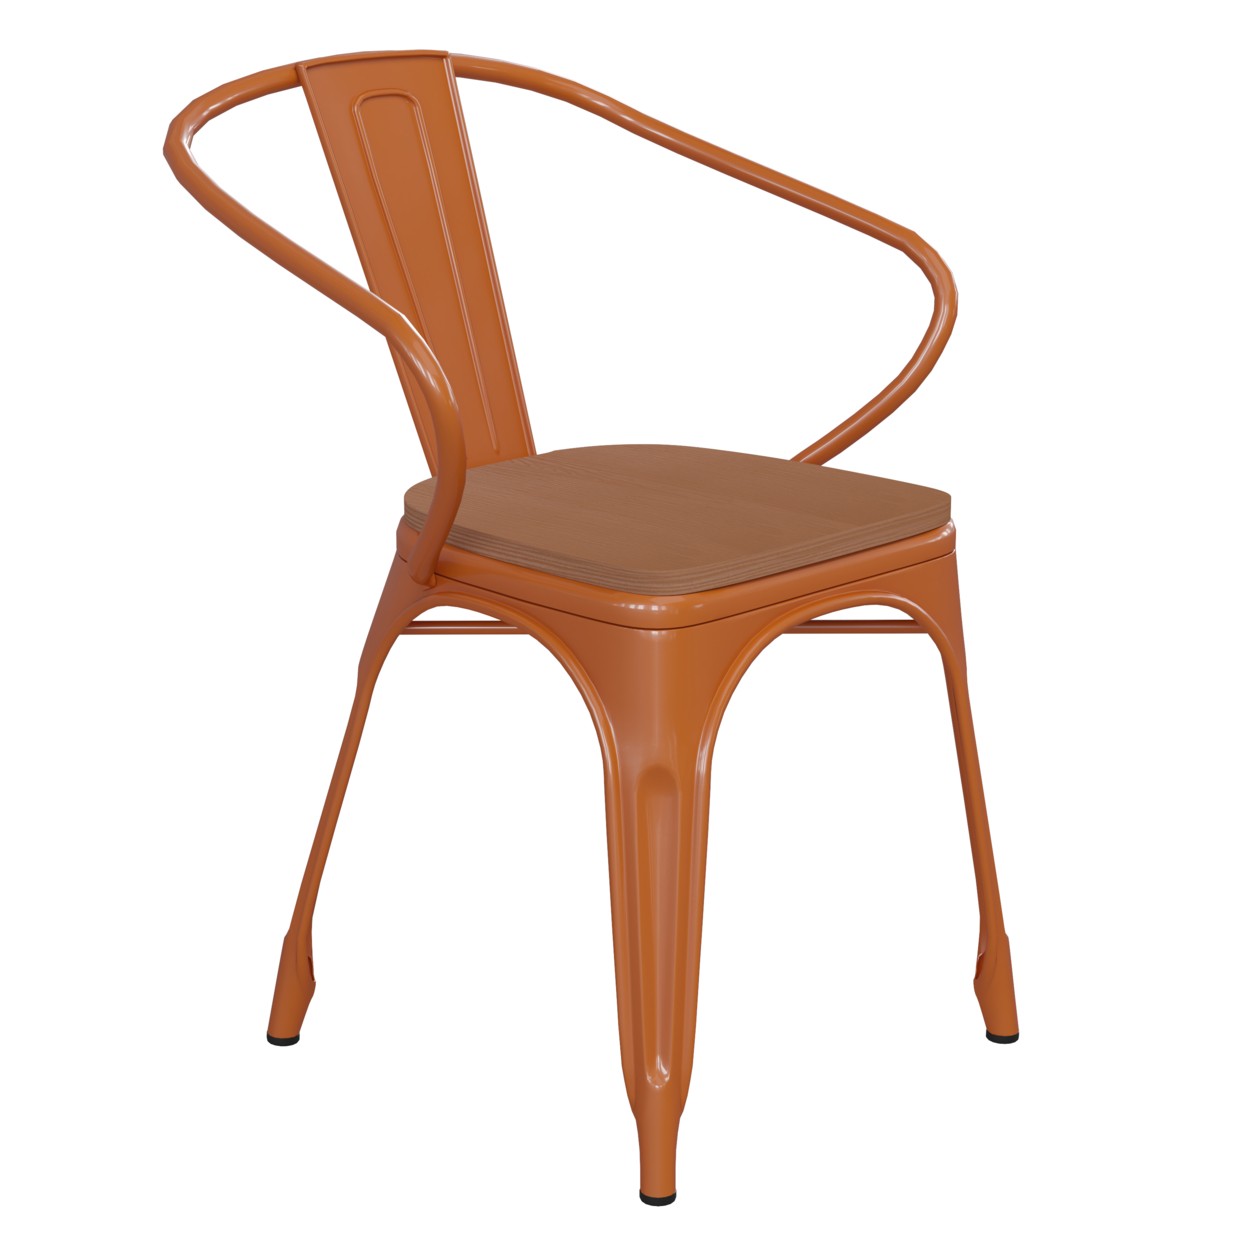 Metal Chair, Open Design Curved Arms, Polyresin Wood Seat, Rust Orange